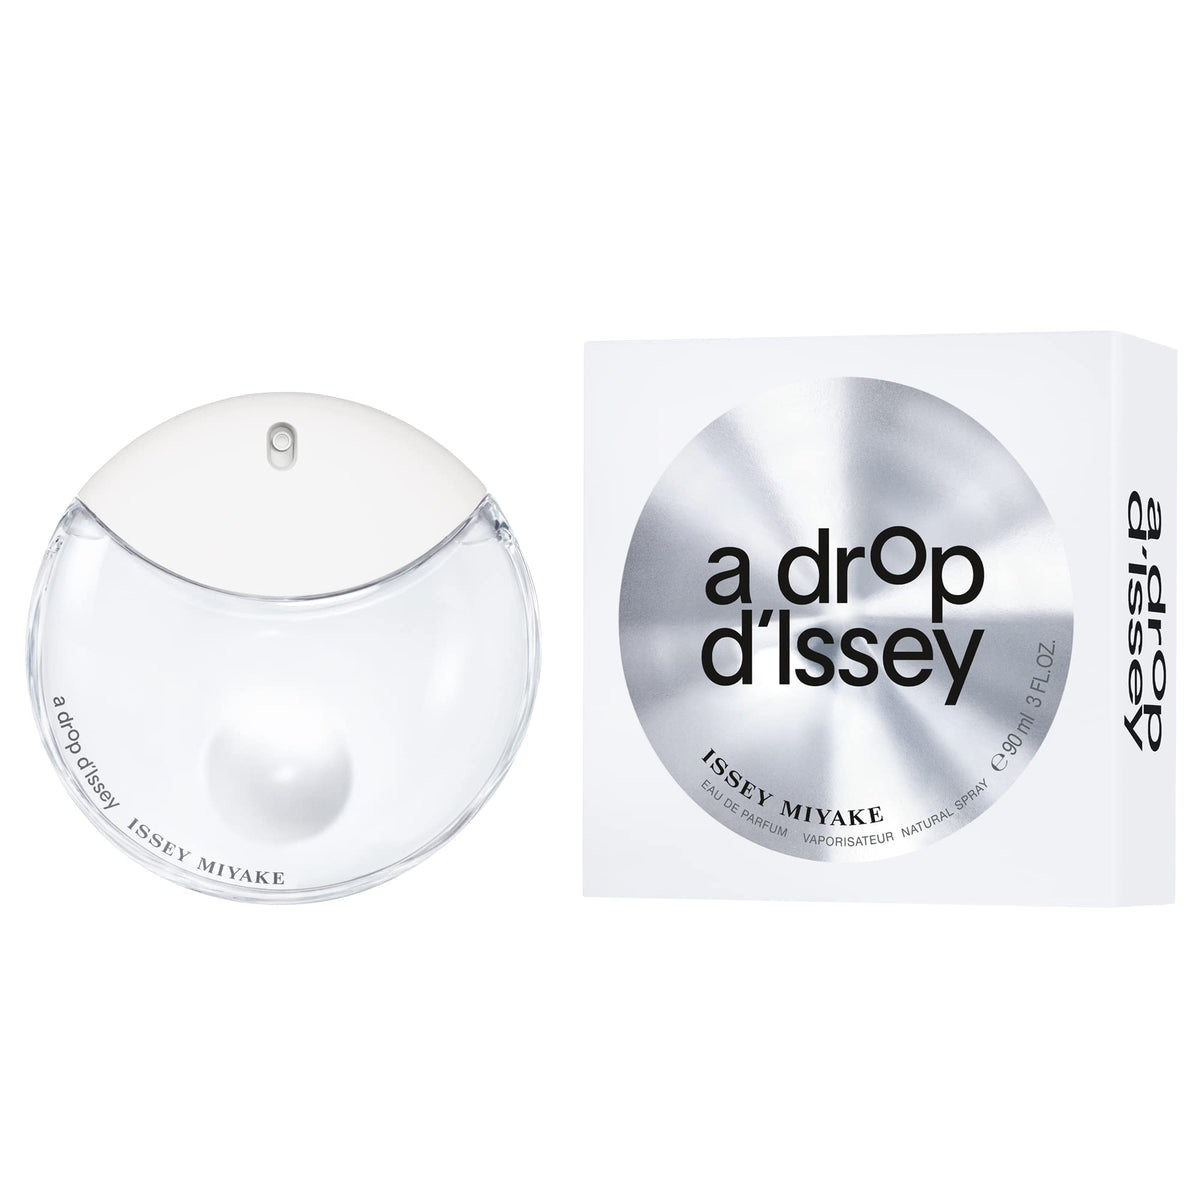 A Drop d'Issey Issey Miyake for Women - EDP - 90ml